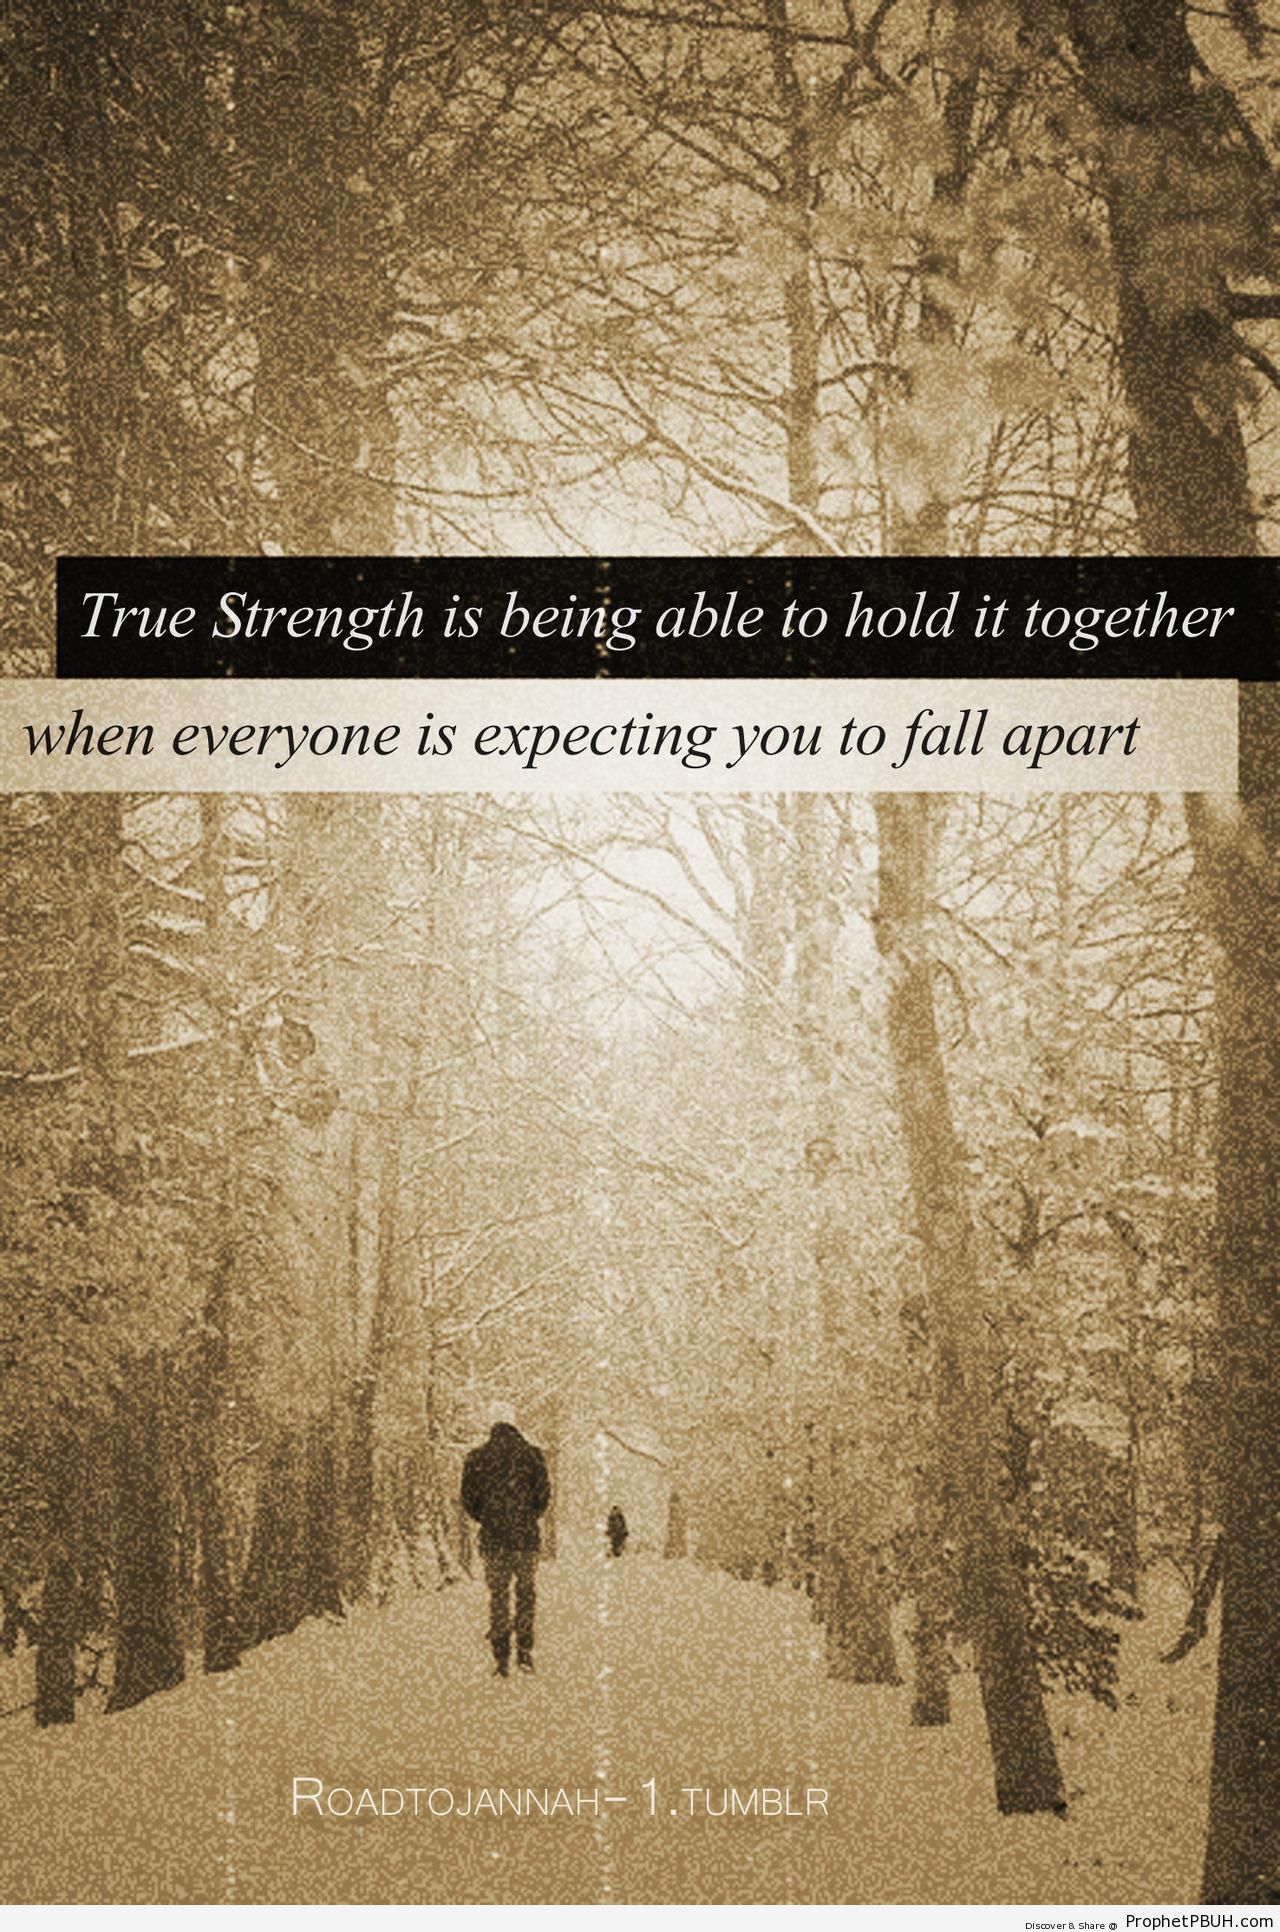 True Strength - Islamic Quotes About Strength 